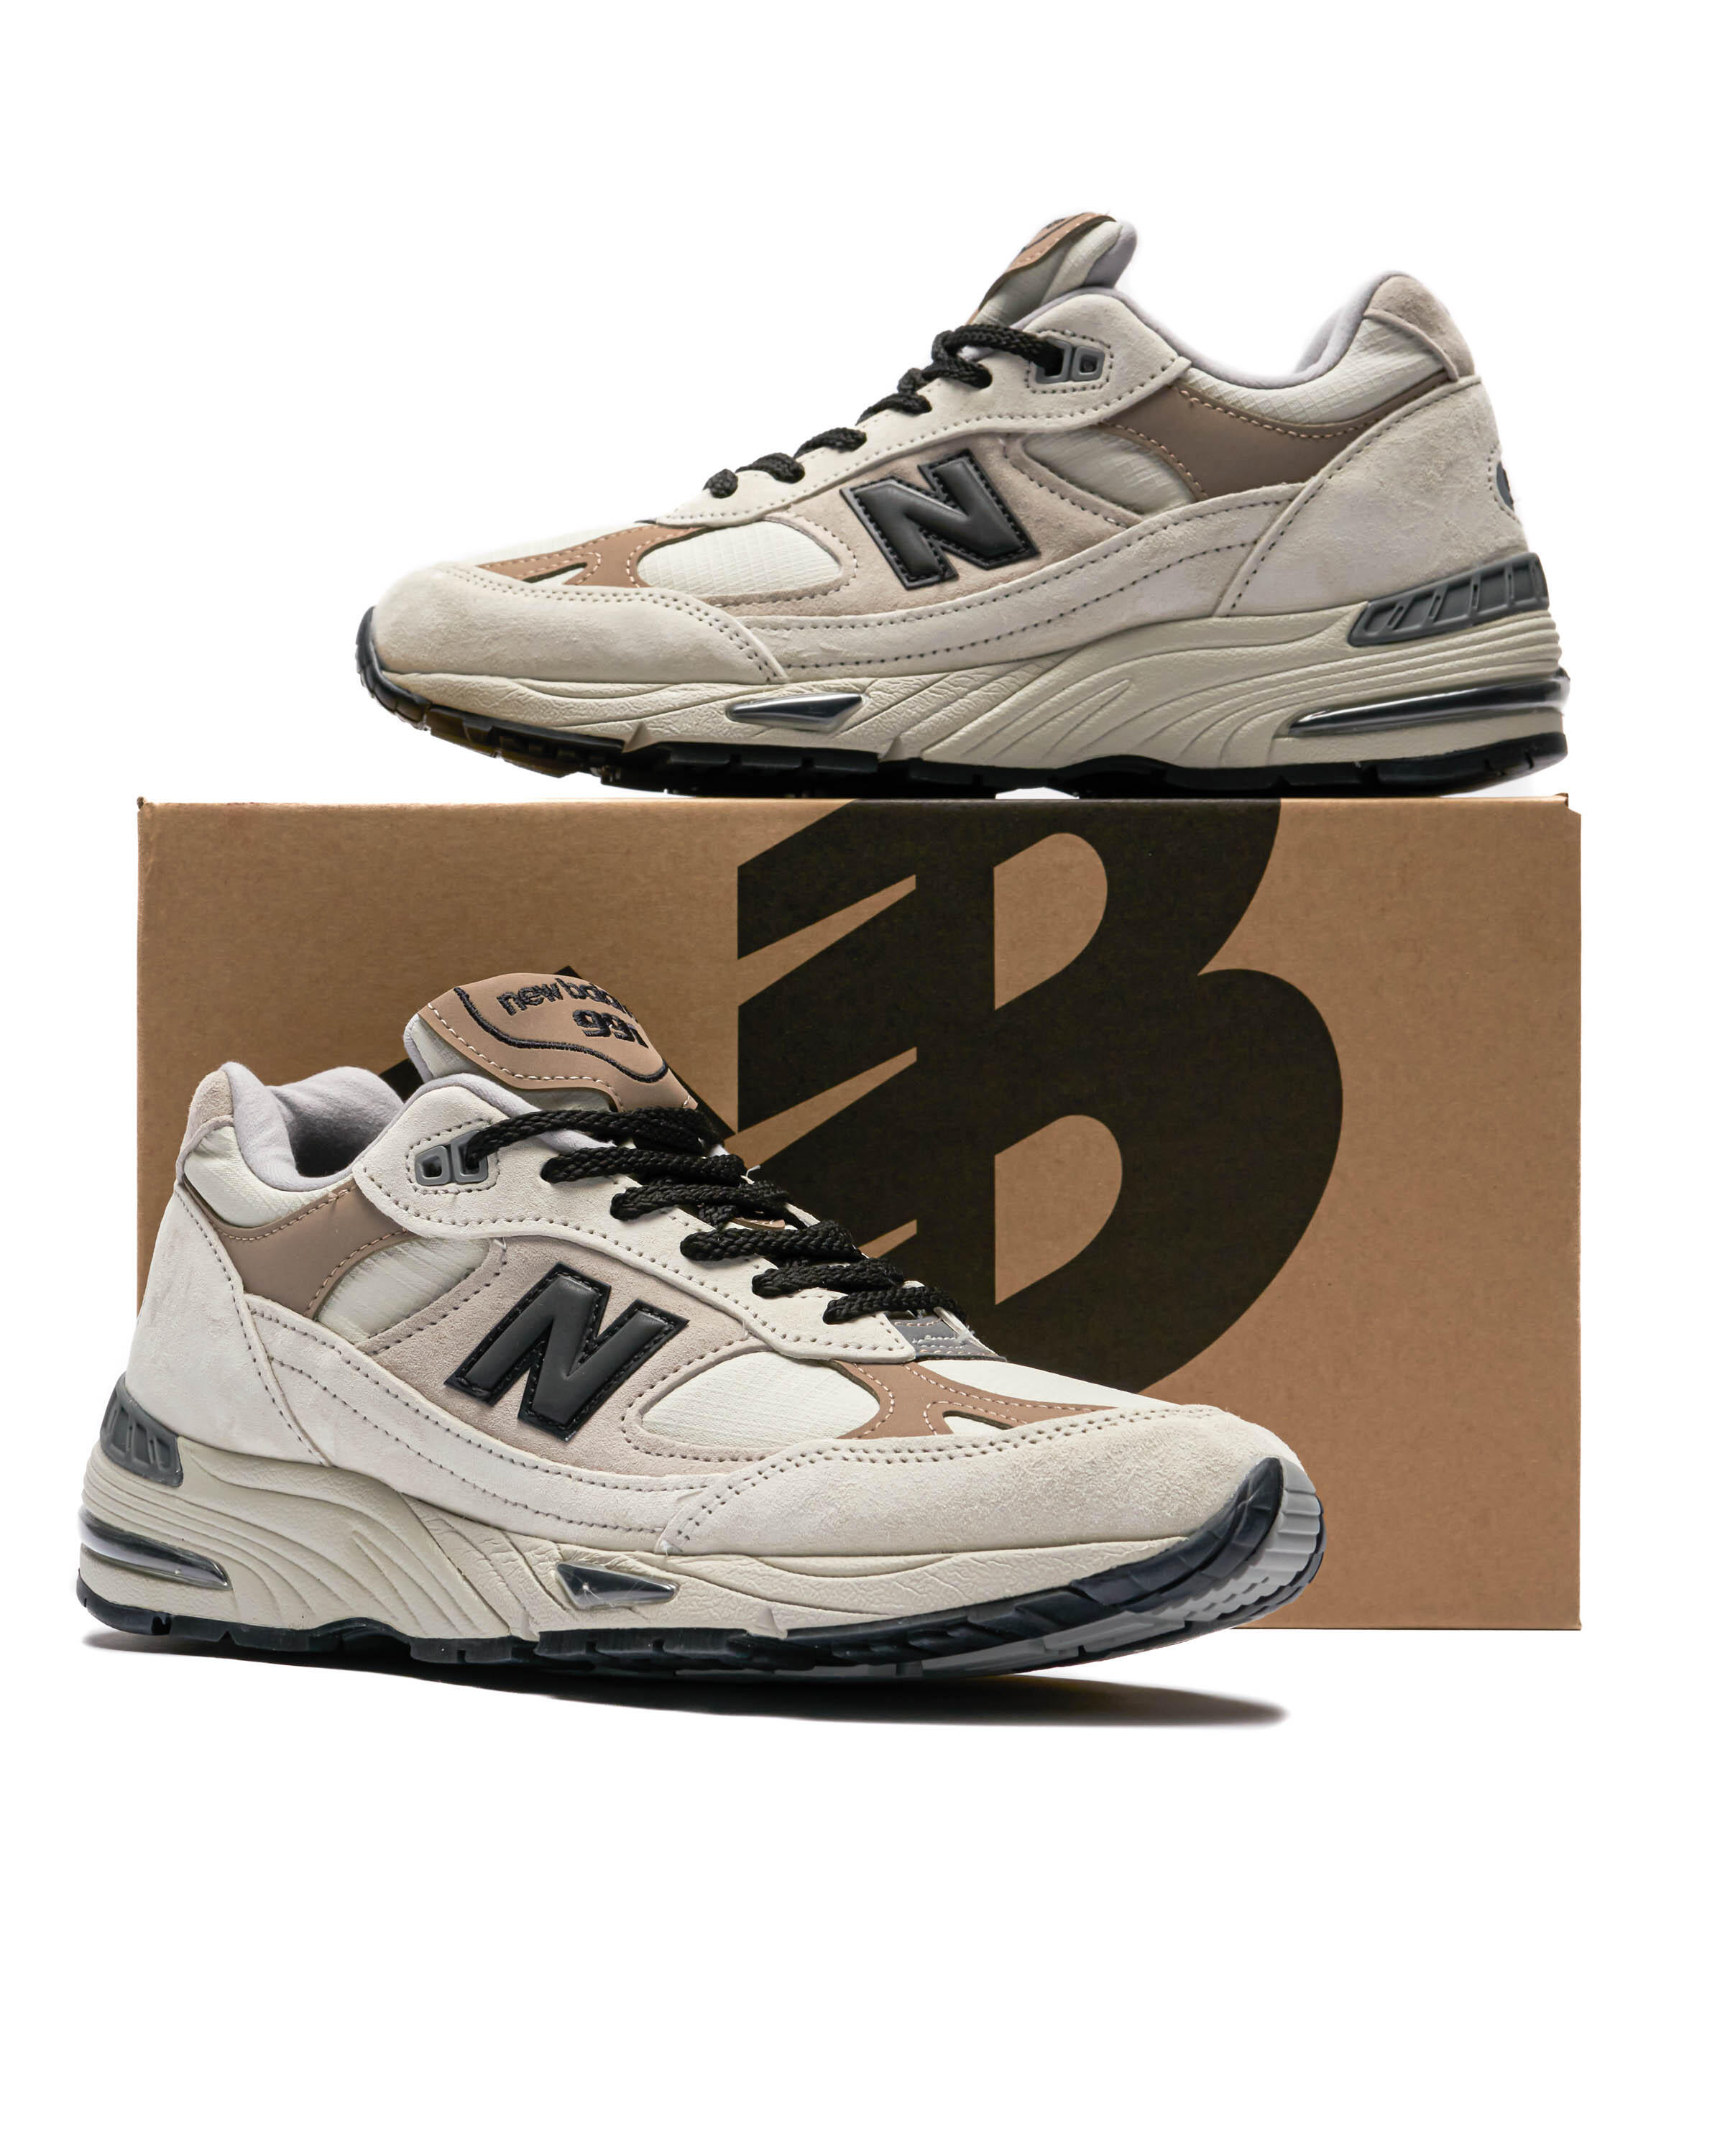 New Balance M 991 WIN - Made in England